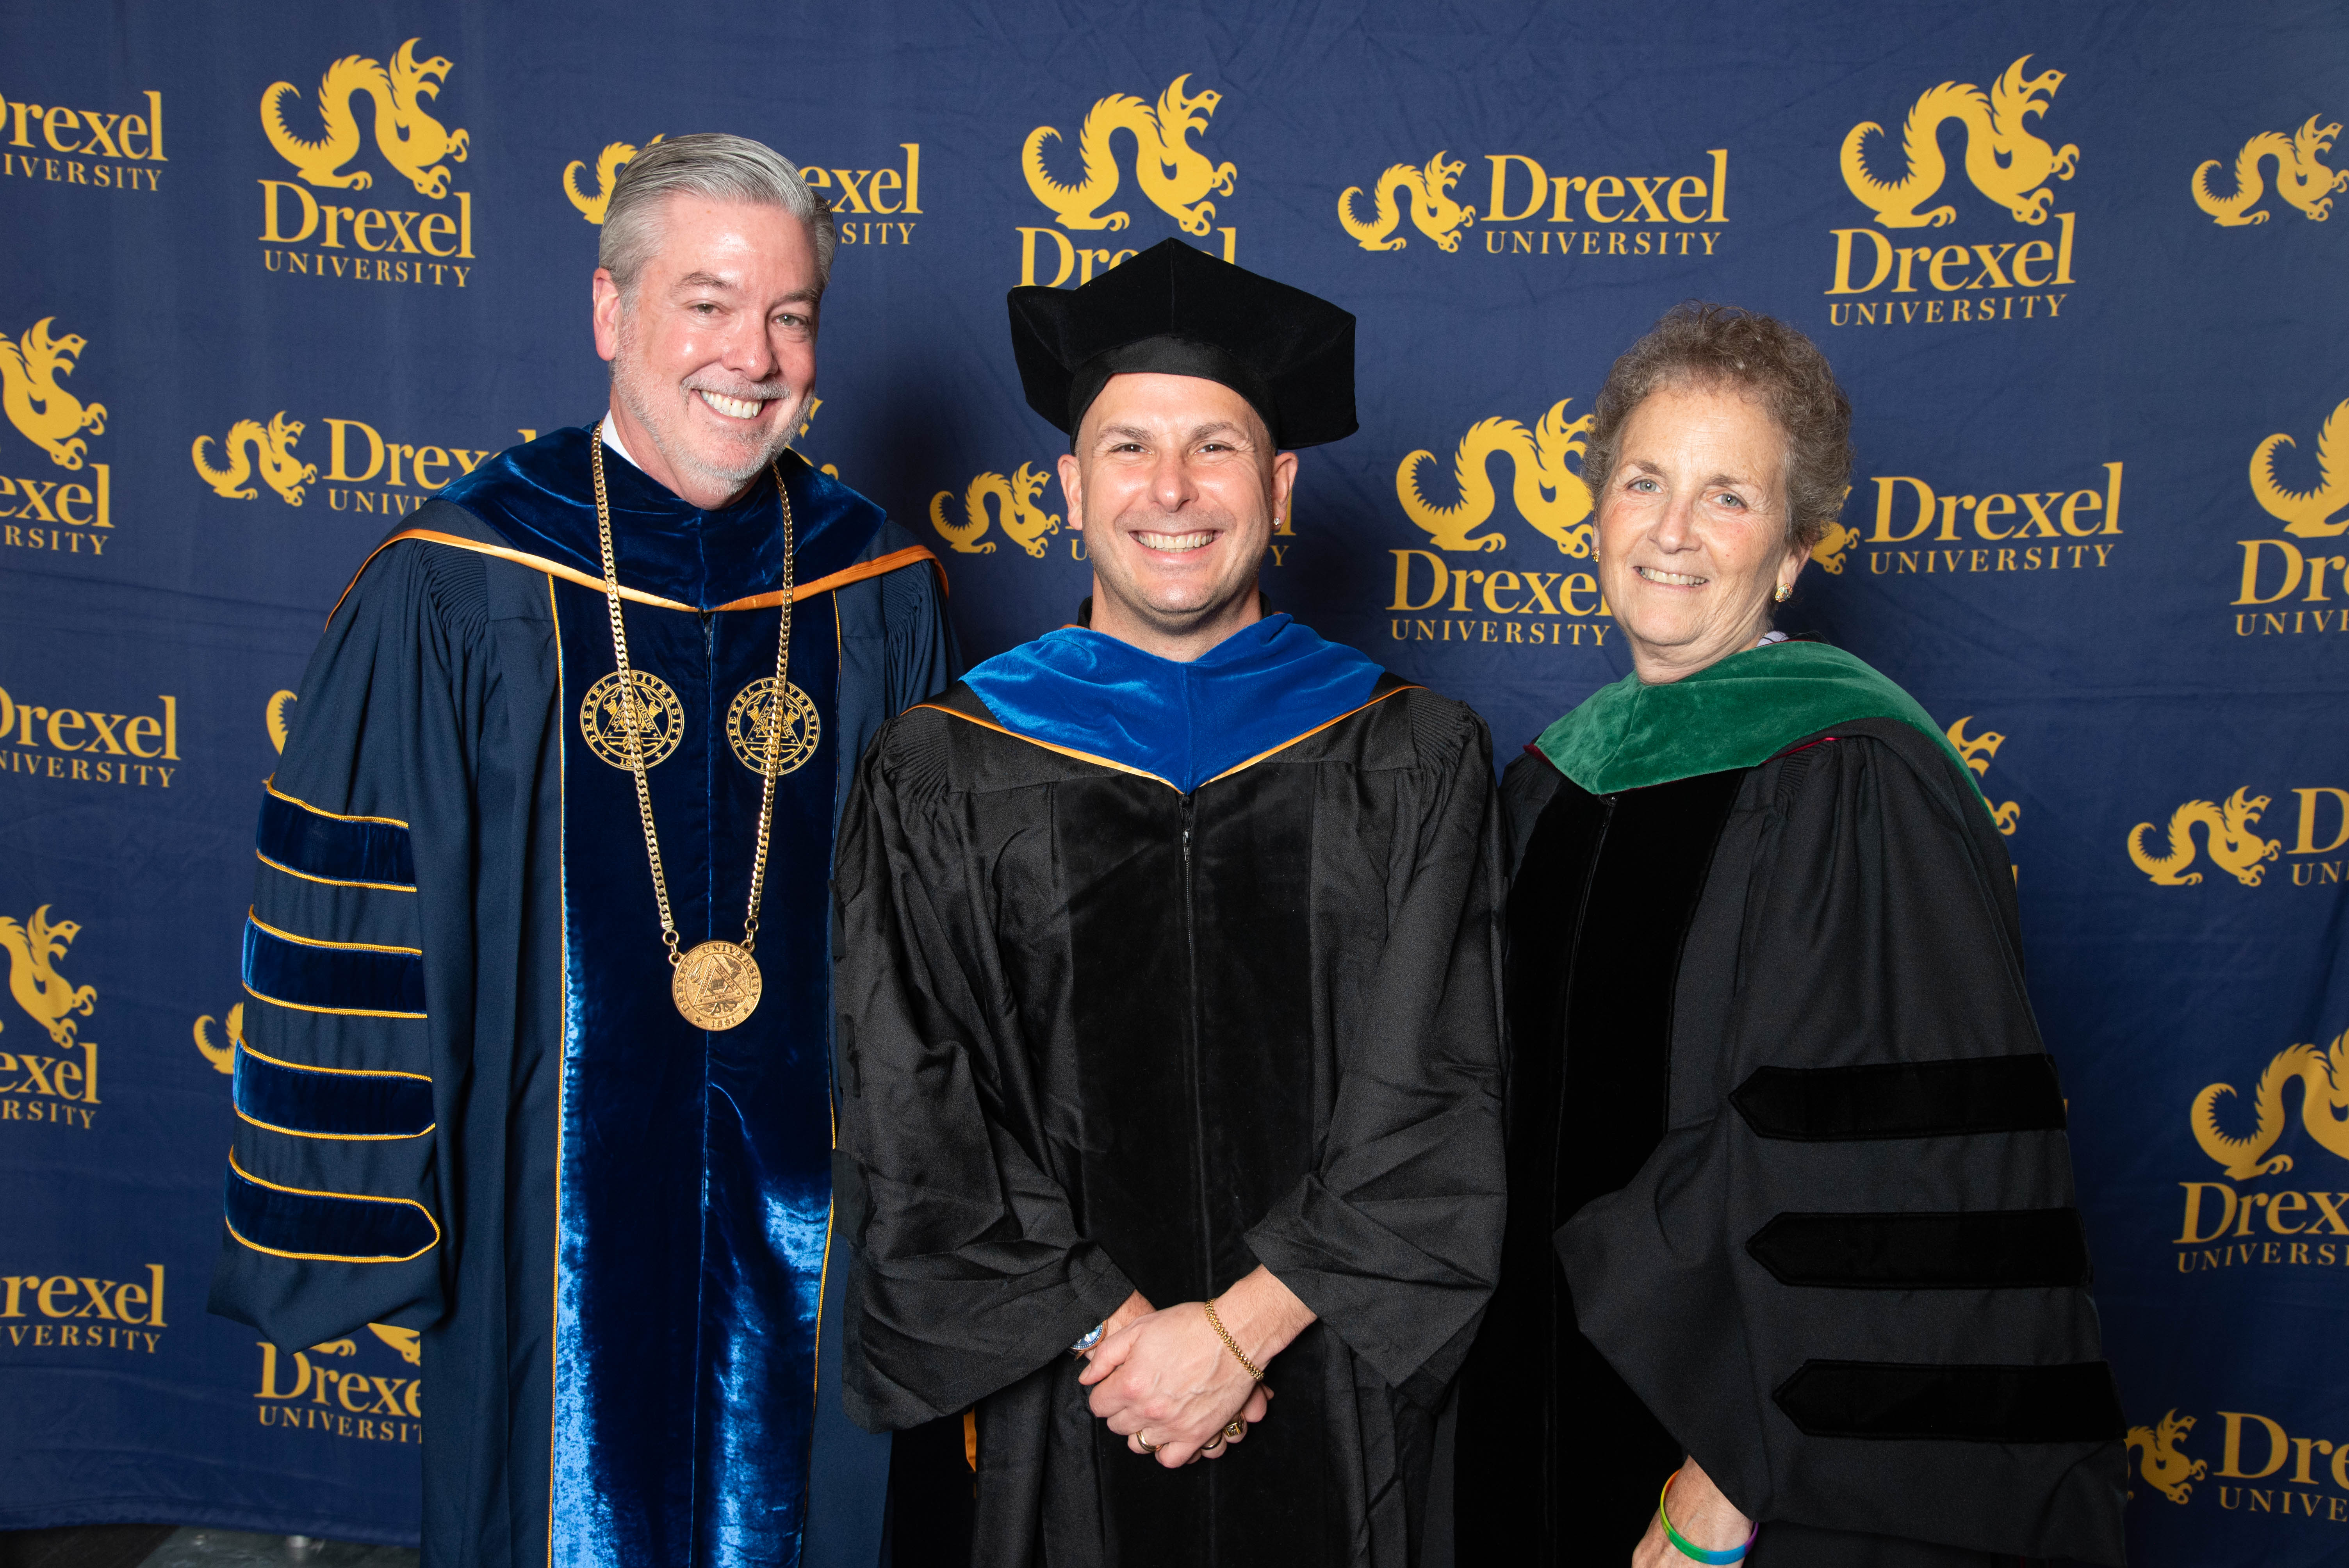 President John Fry, Marla Gold, and Yannick Nézet-Séguin pose for a photo in commencement regalia